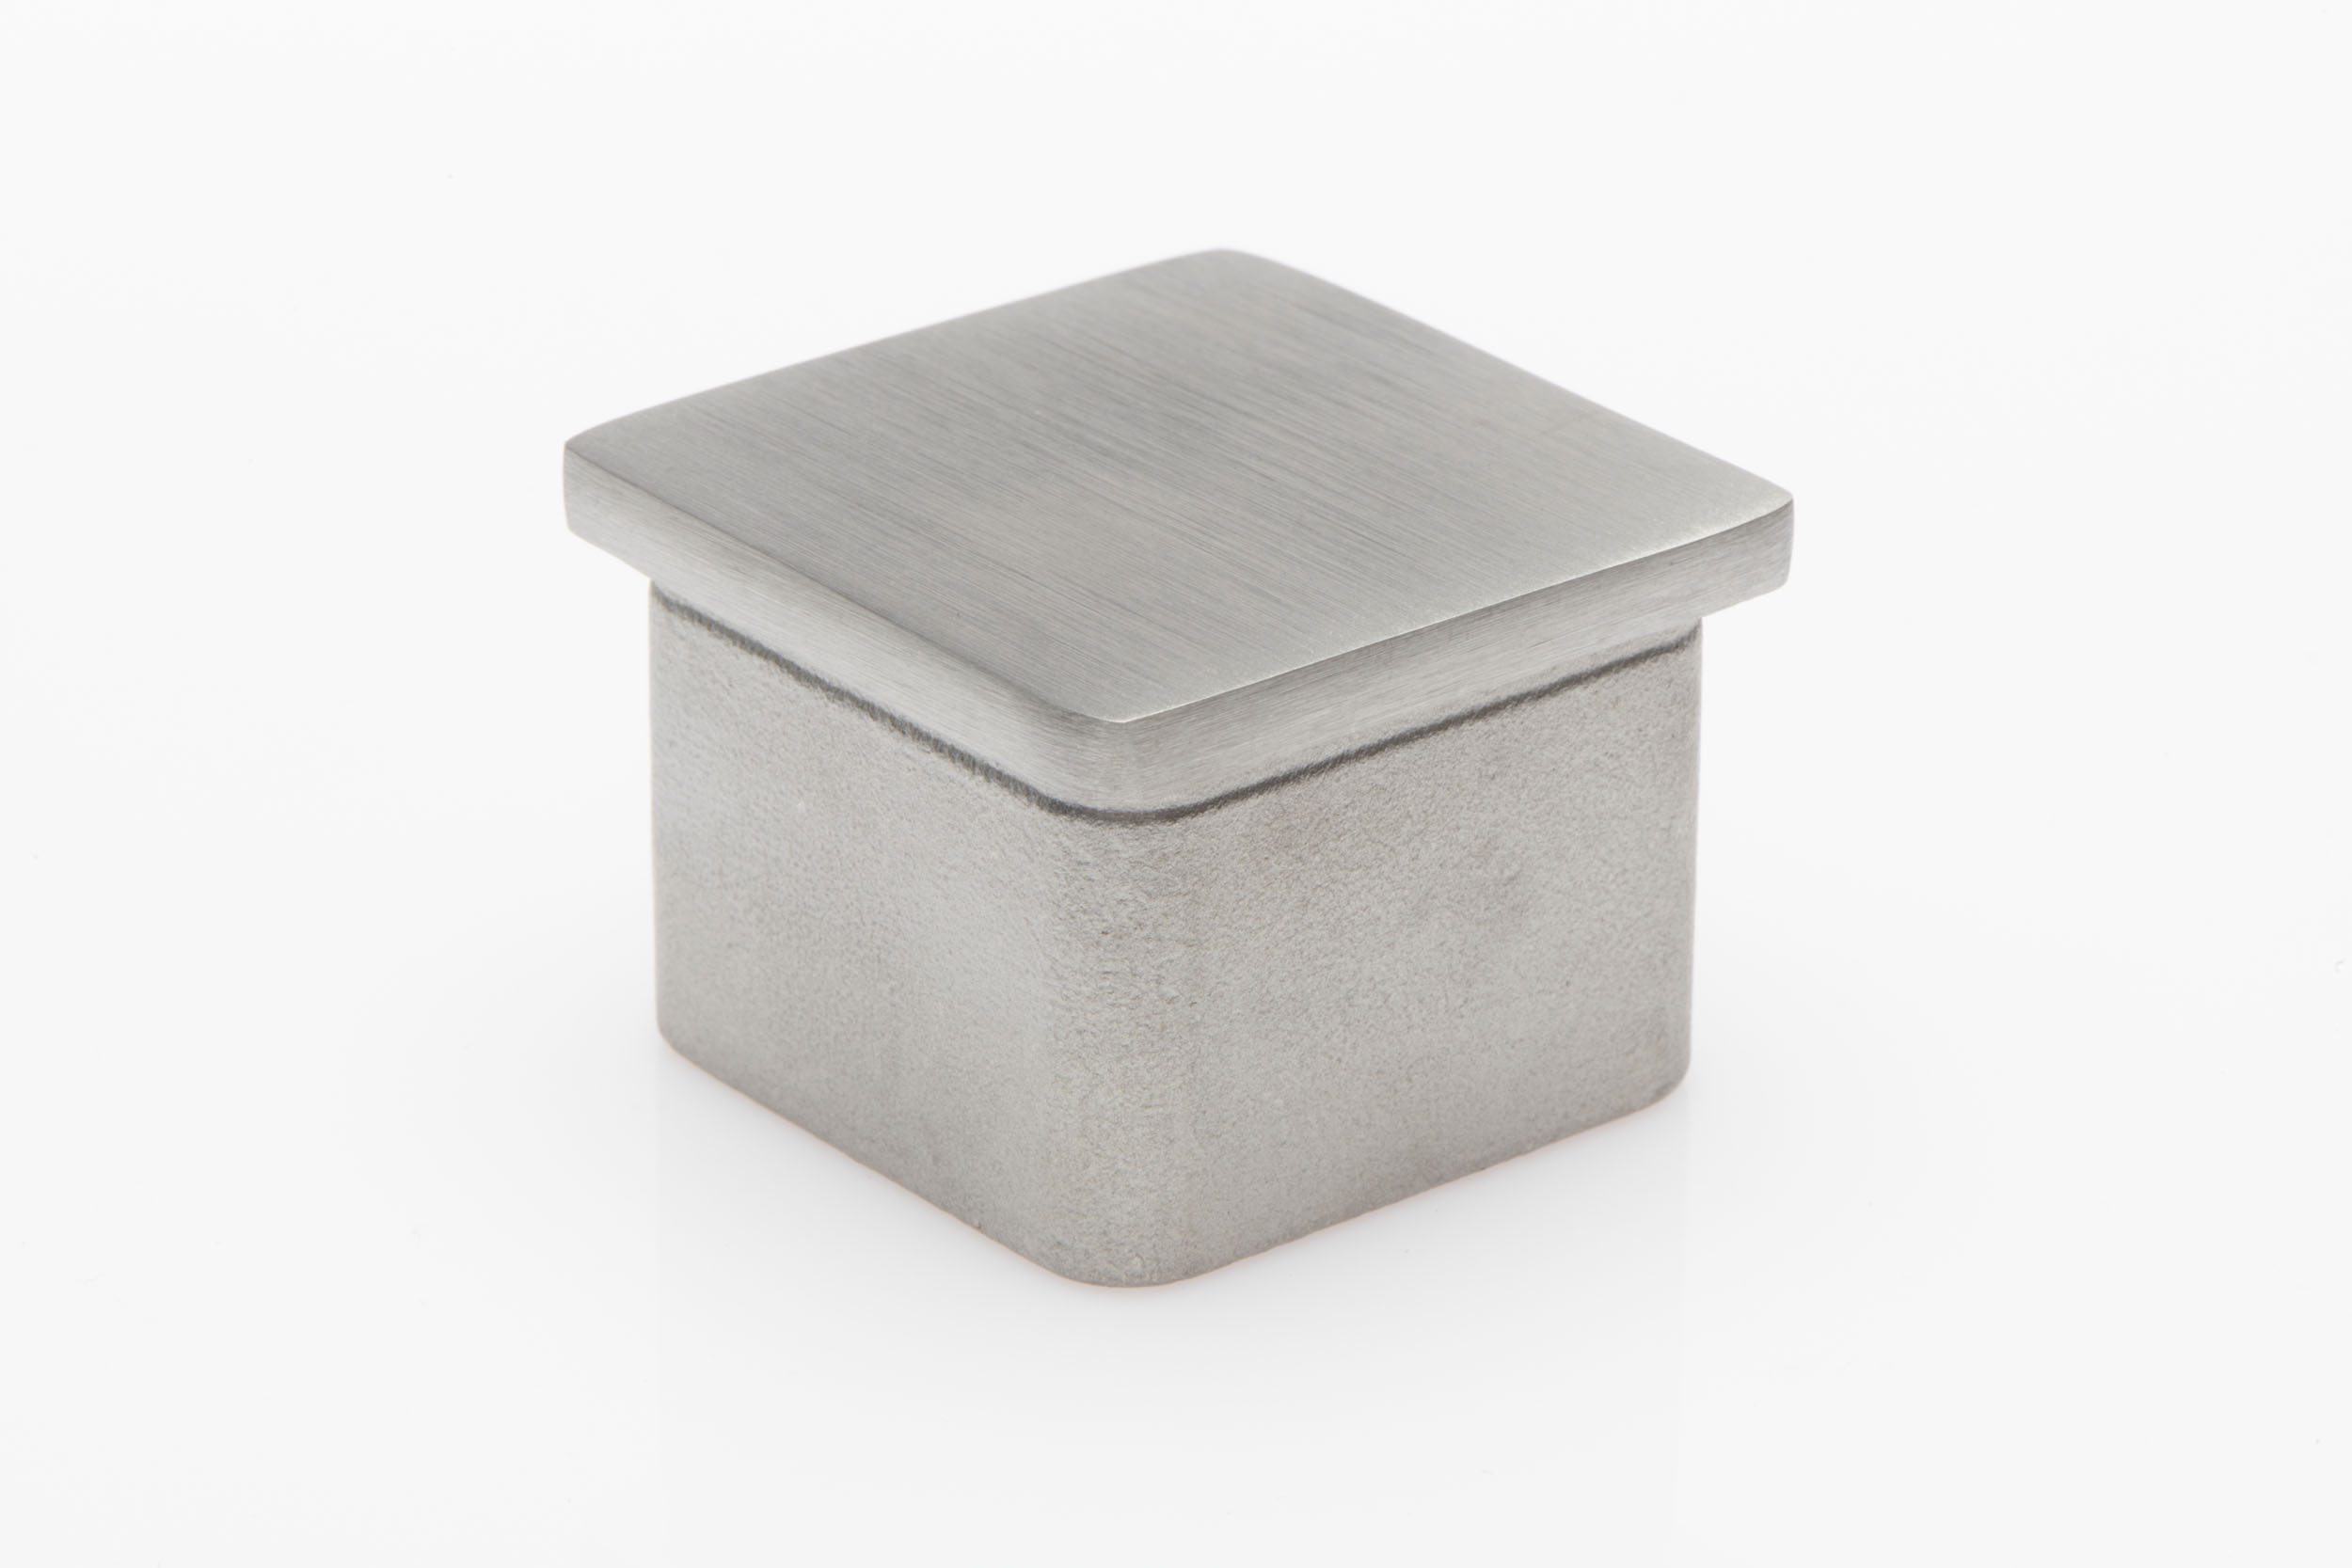 Grade 304 Stainless Steel 40mm x 40mm Square End Cap